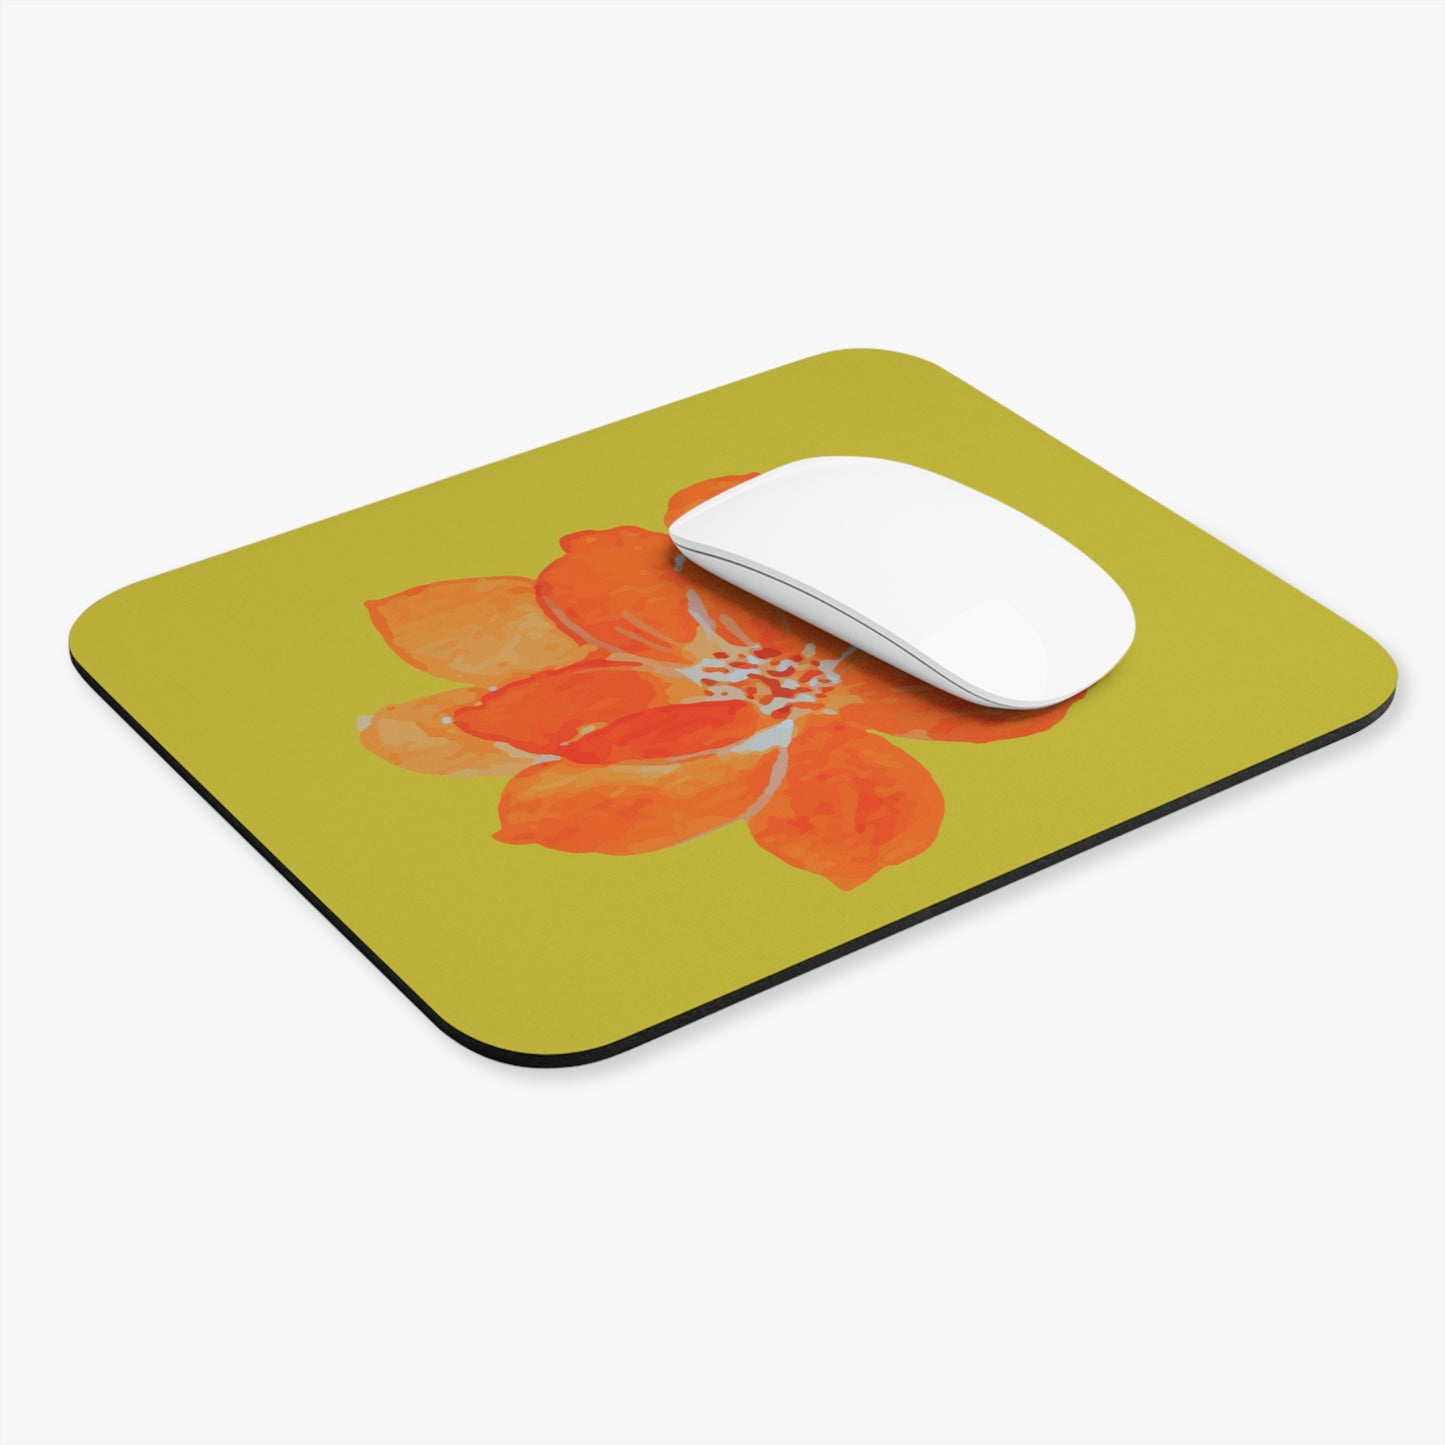 Orange Flower Mouse Pad, Yellow Mouse Pad, Flower Design Pad, Computer Mouse Pad, Laptop Mouse Pad (Rectangle)